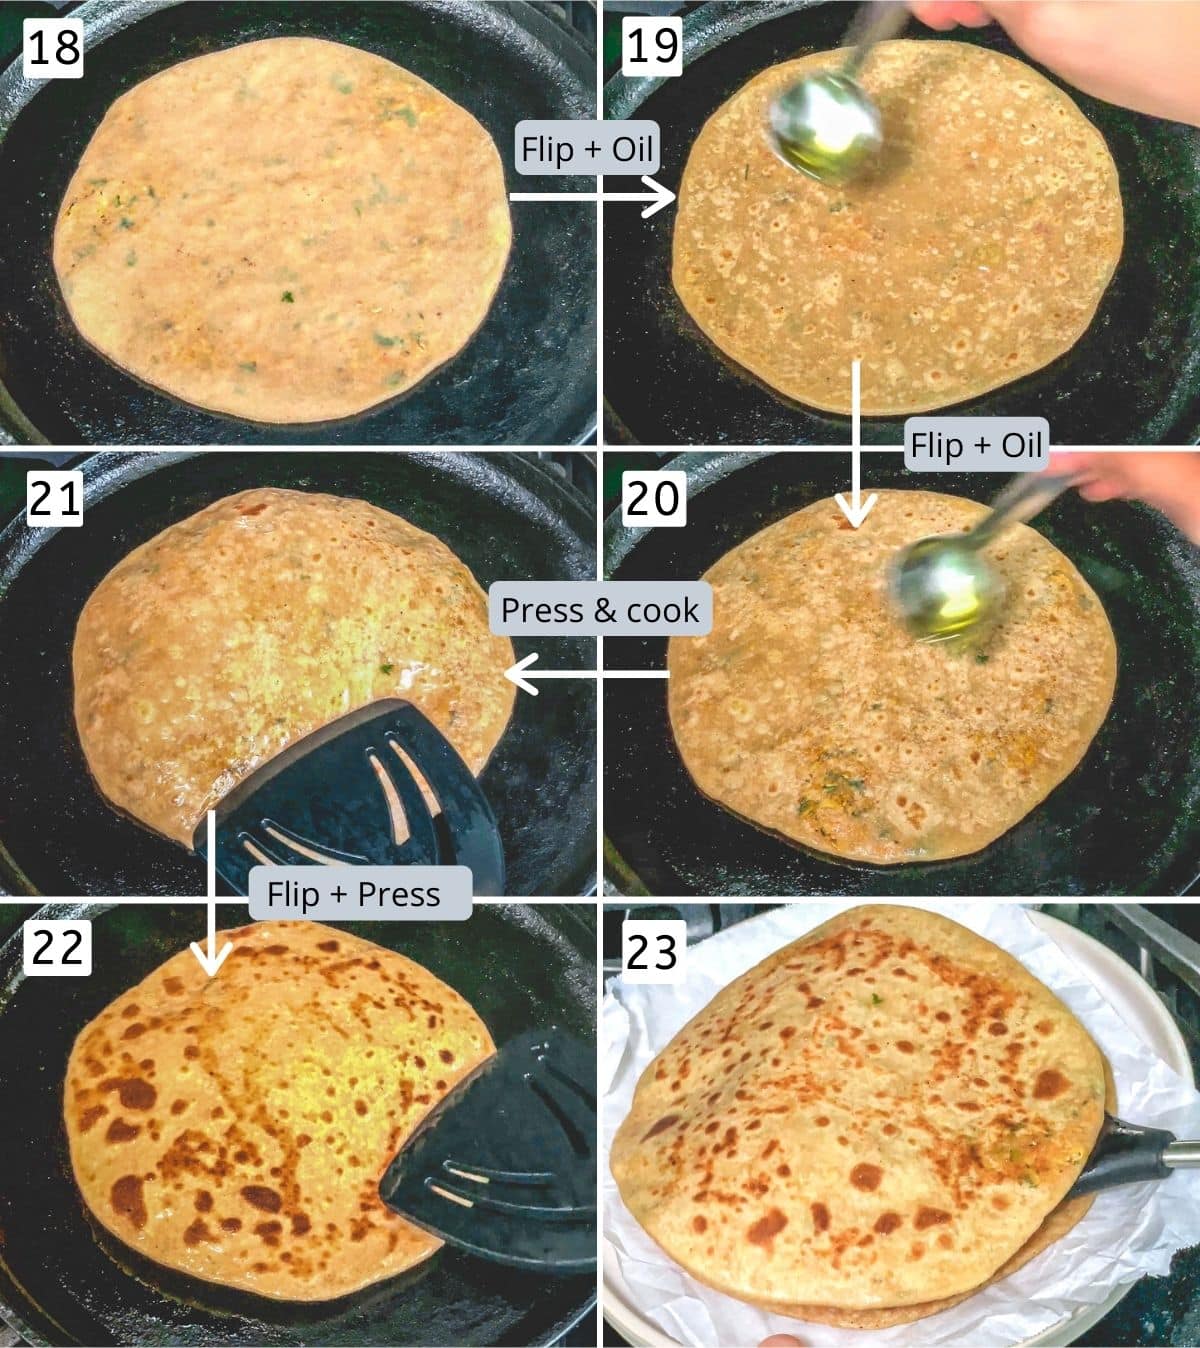 Collage of 6 images showing pan frying paratha with oil with labels on the image.